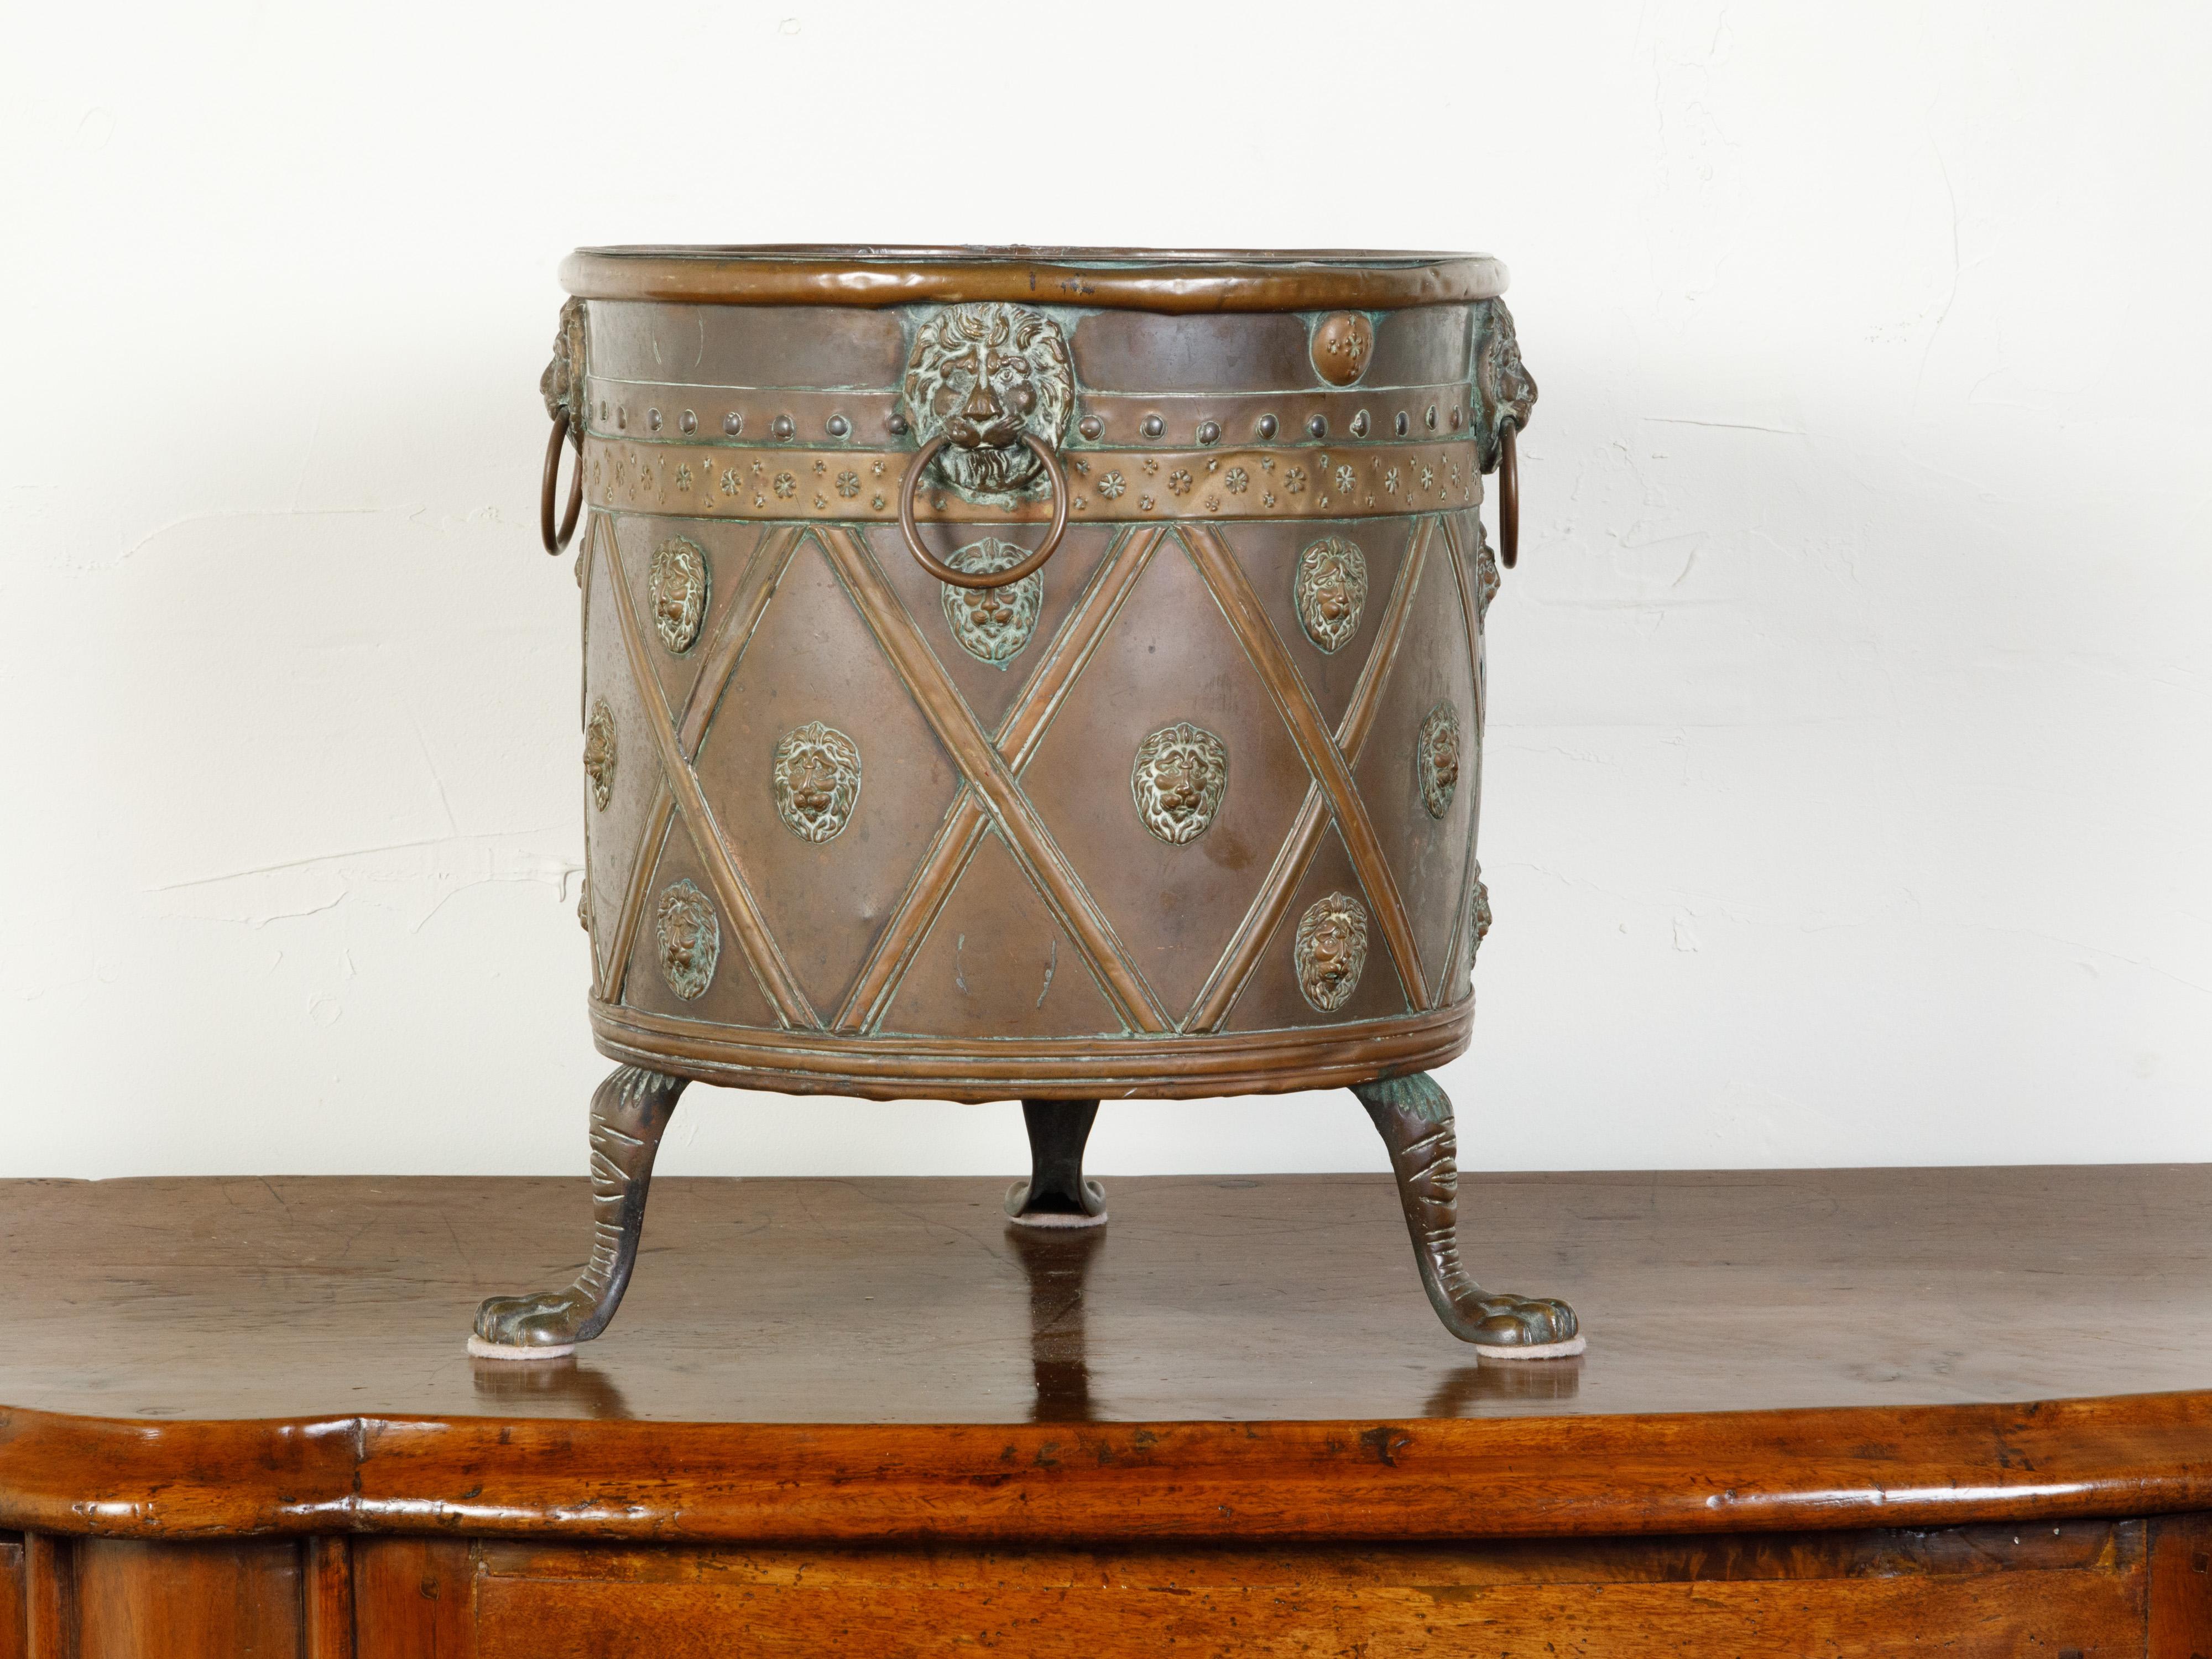 An English copper planter from the 19th century, with lion heads, diamond motifs and paw feet. Created in England during the 19th century, this copper planter features a circular body adorned with a rhythmic arrangement of lion heads, surrounded by